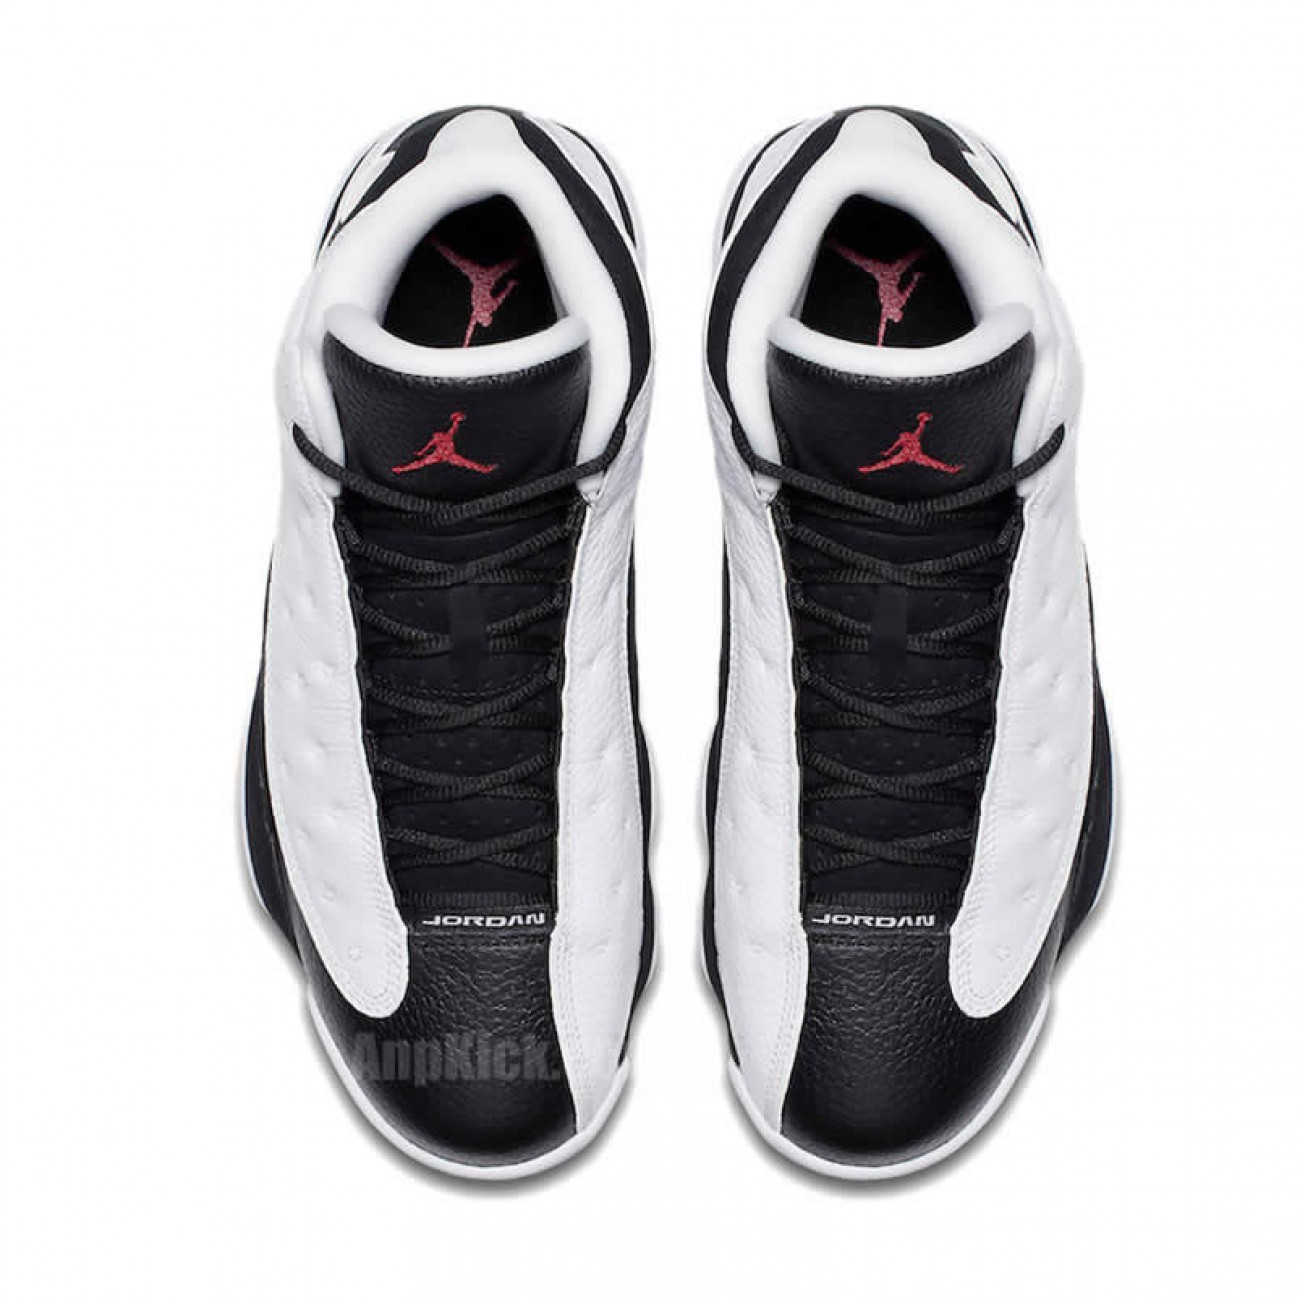 Air Jordan 13 "He Got Game" 2018 Black And White Outfit For Sale 414571-104